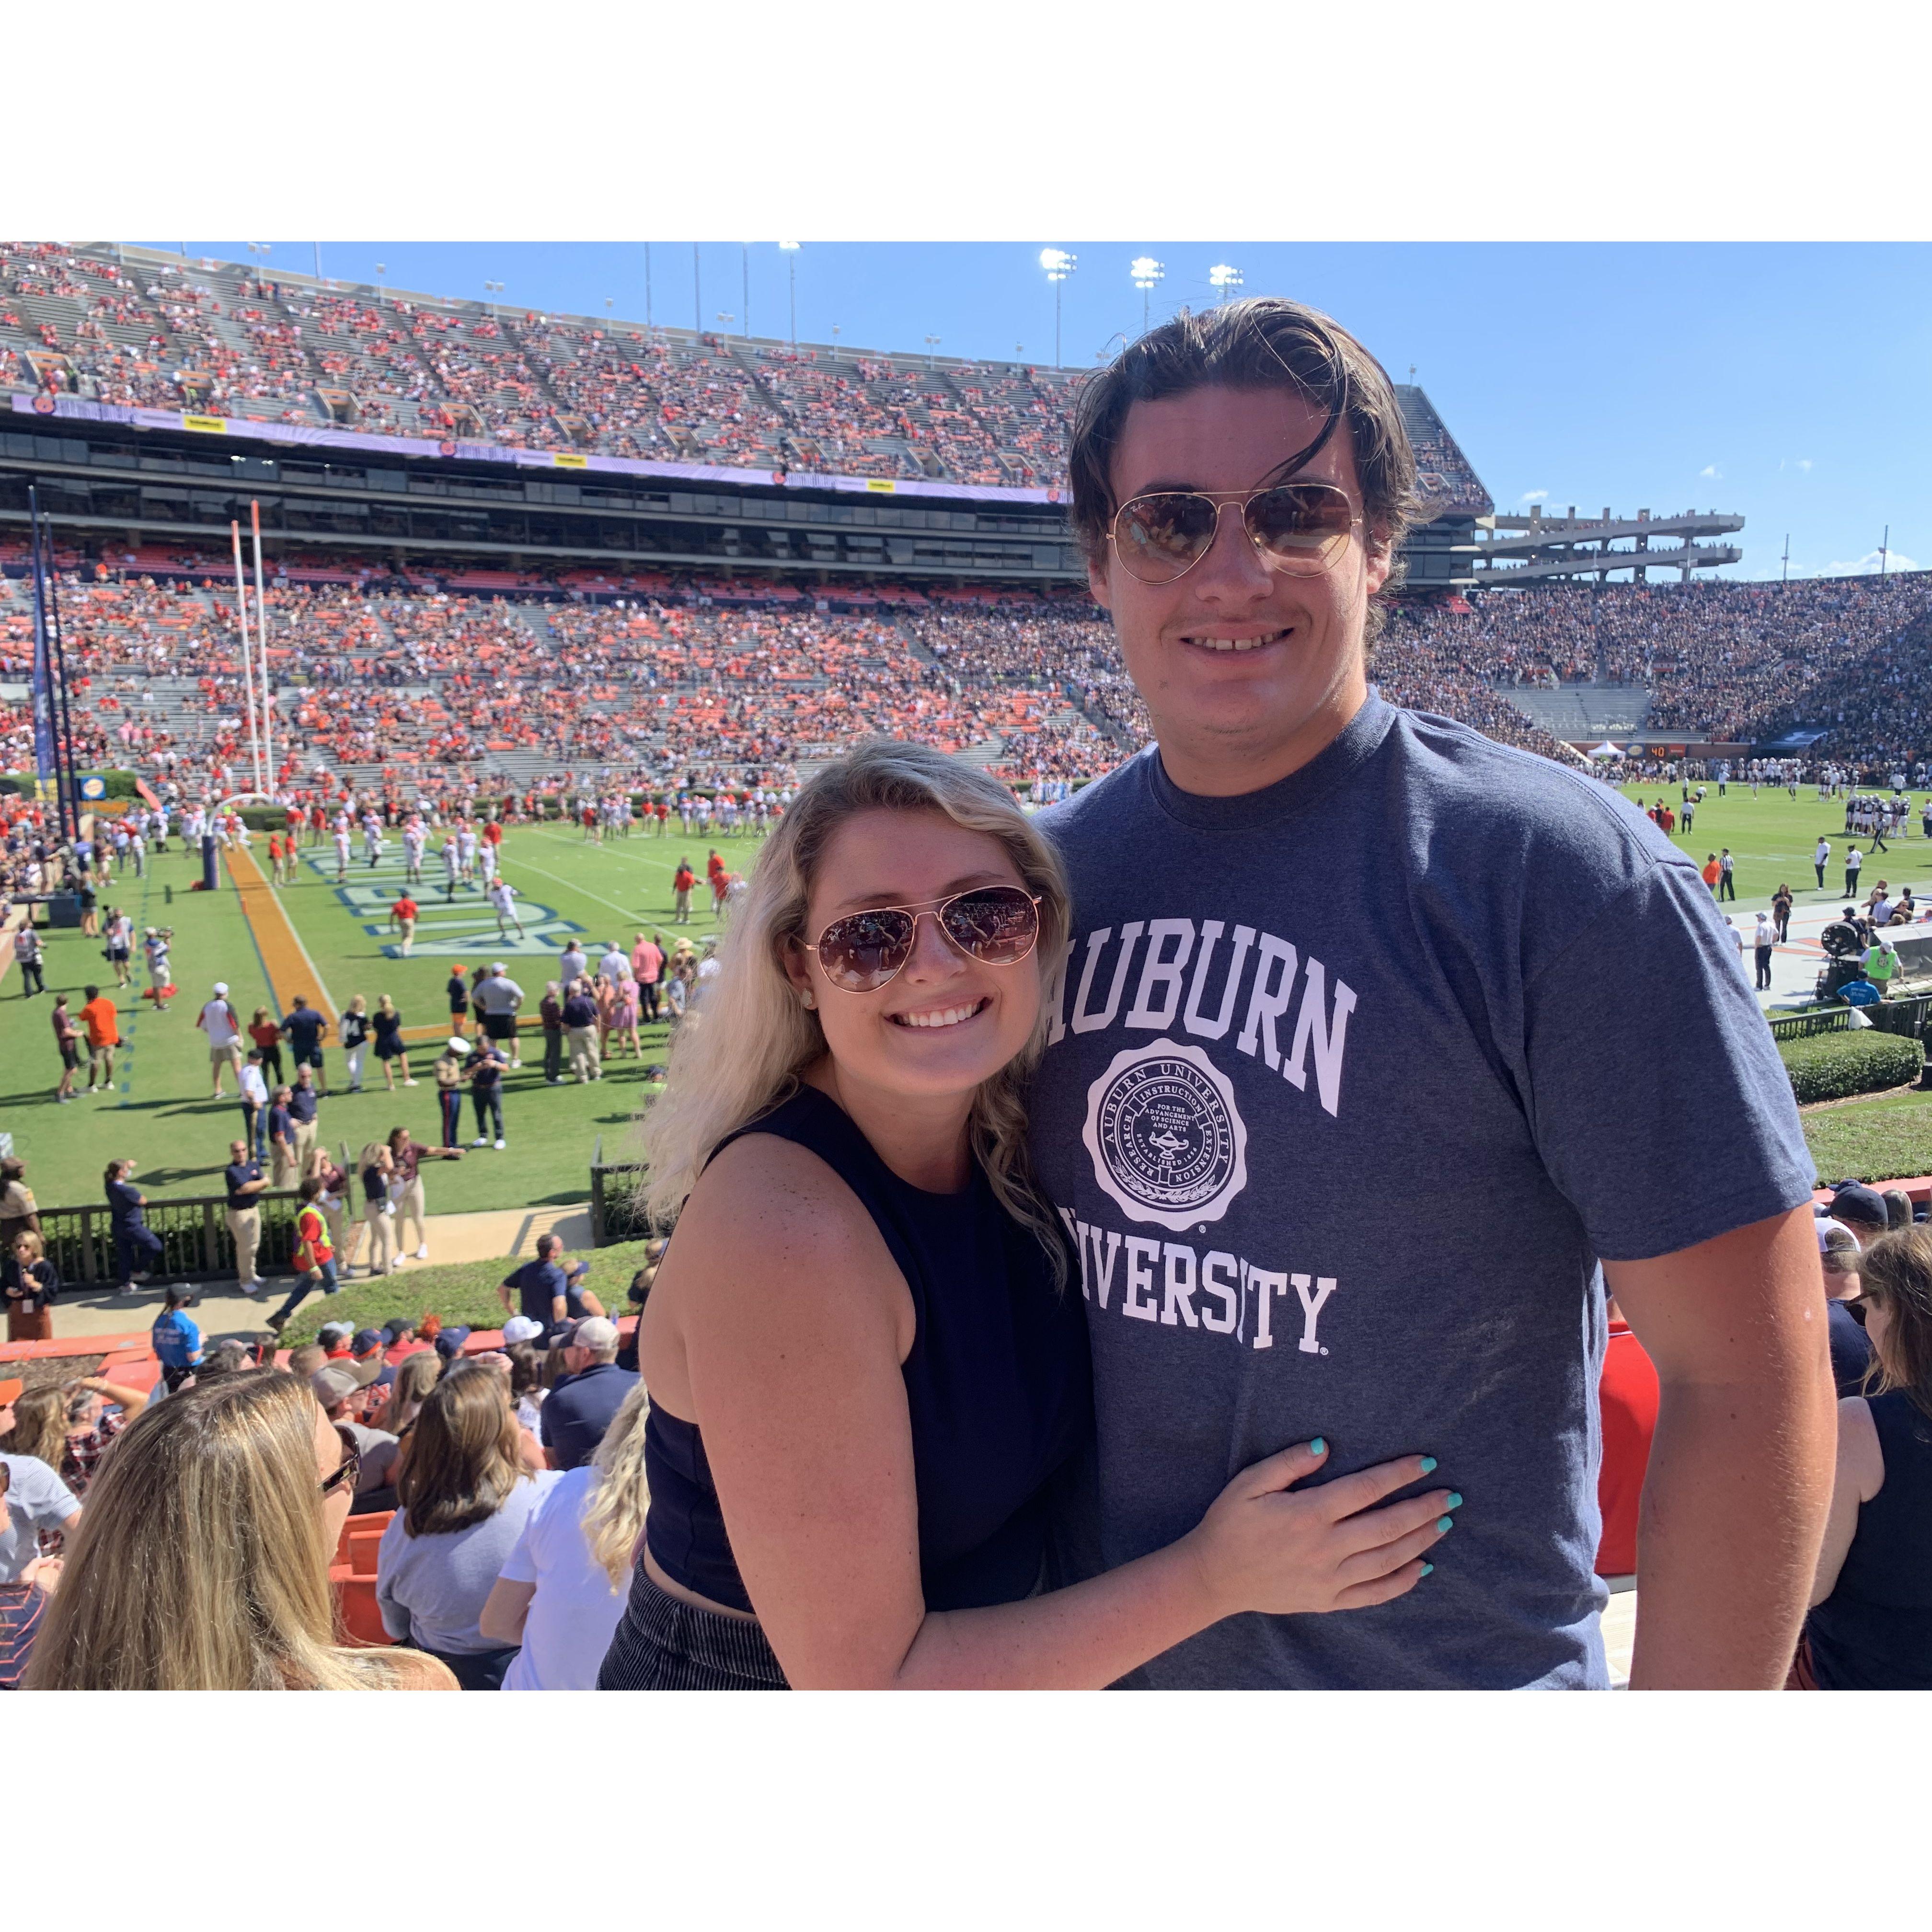 Our first Auburn football game!